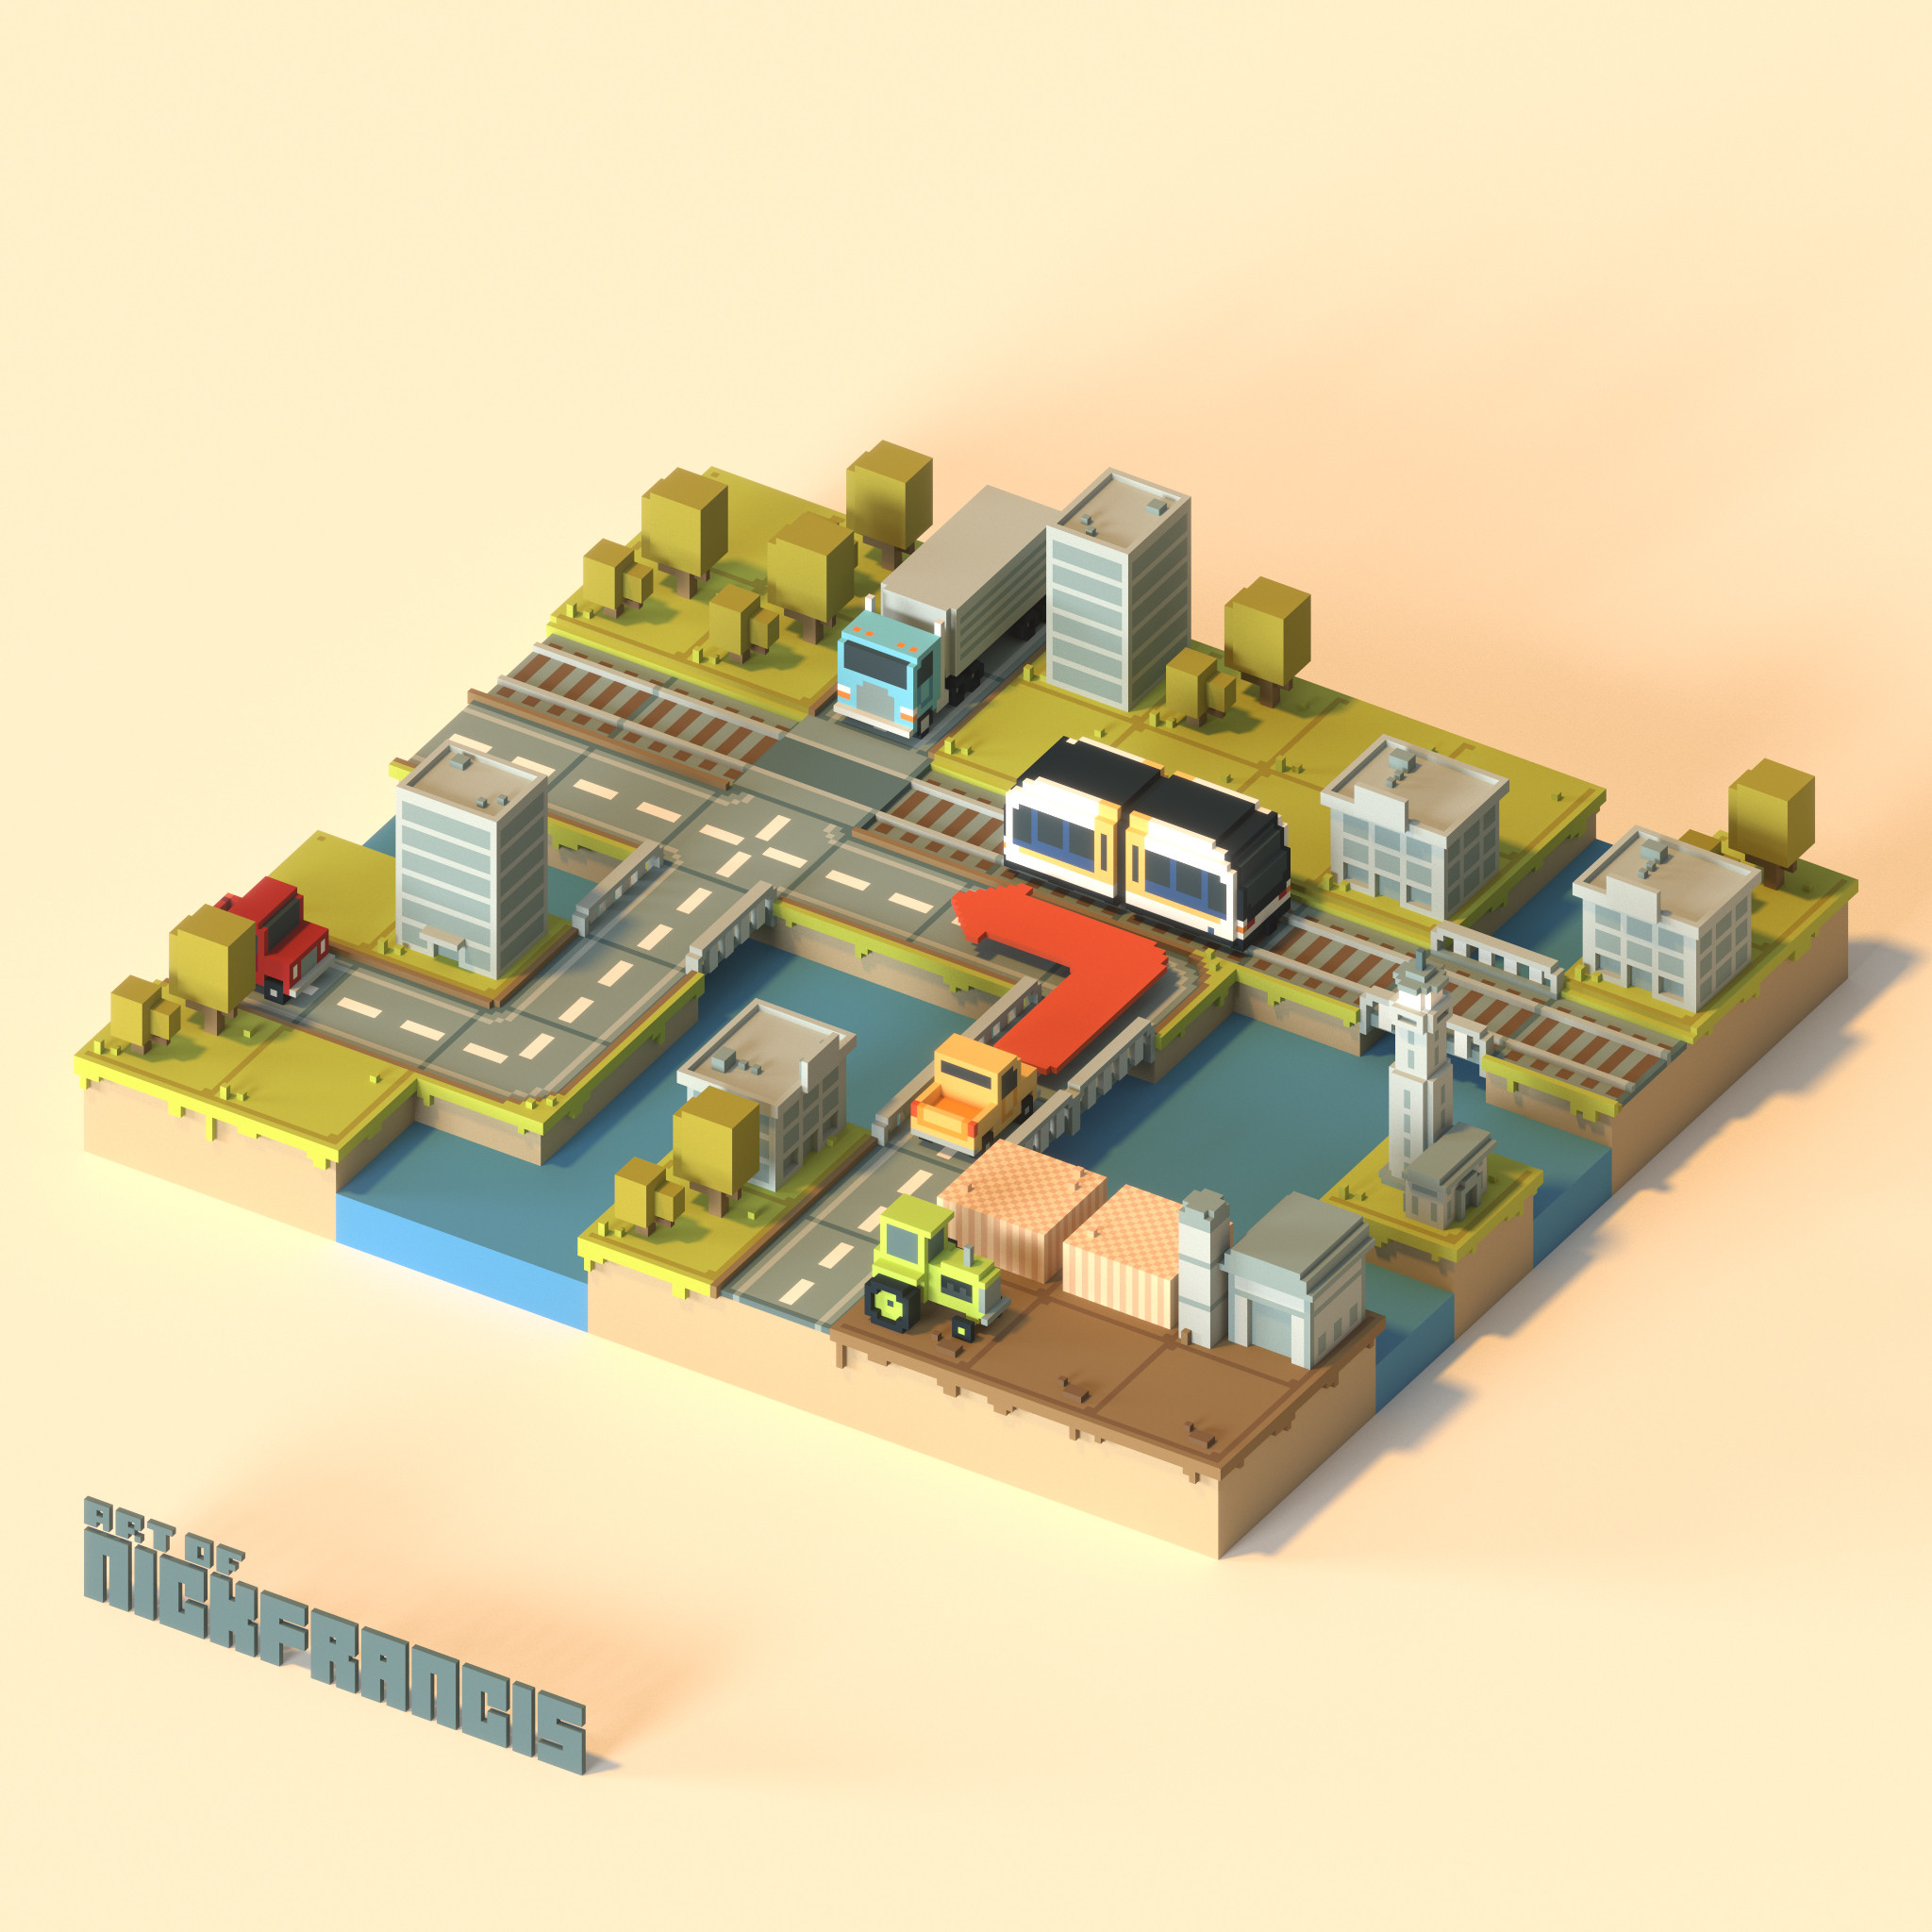 Isometric rendering of the voxel square grid town created using Magicavoxel software.